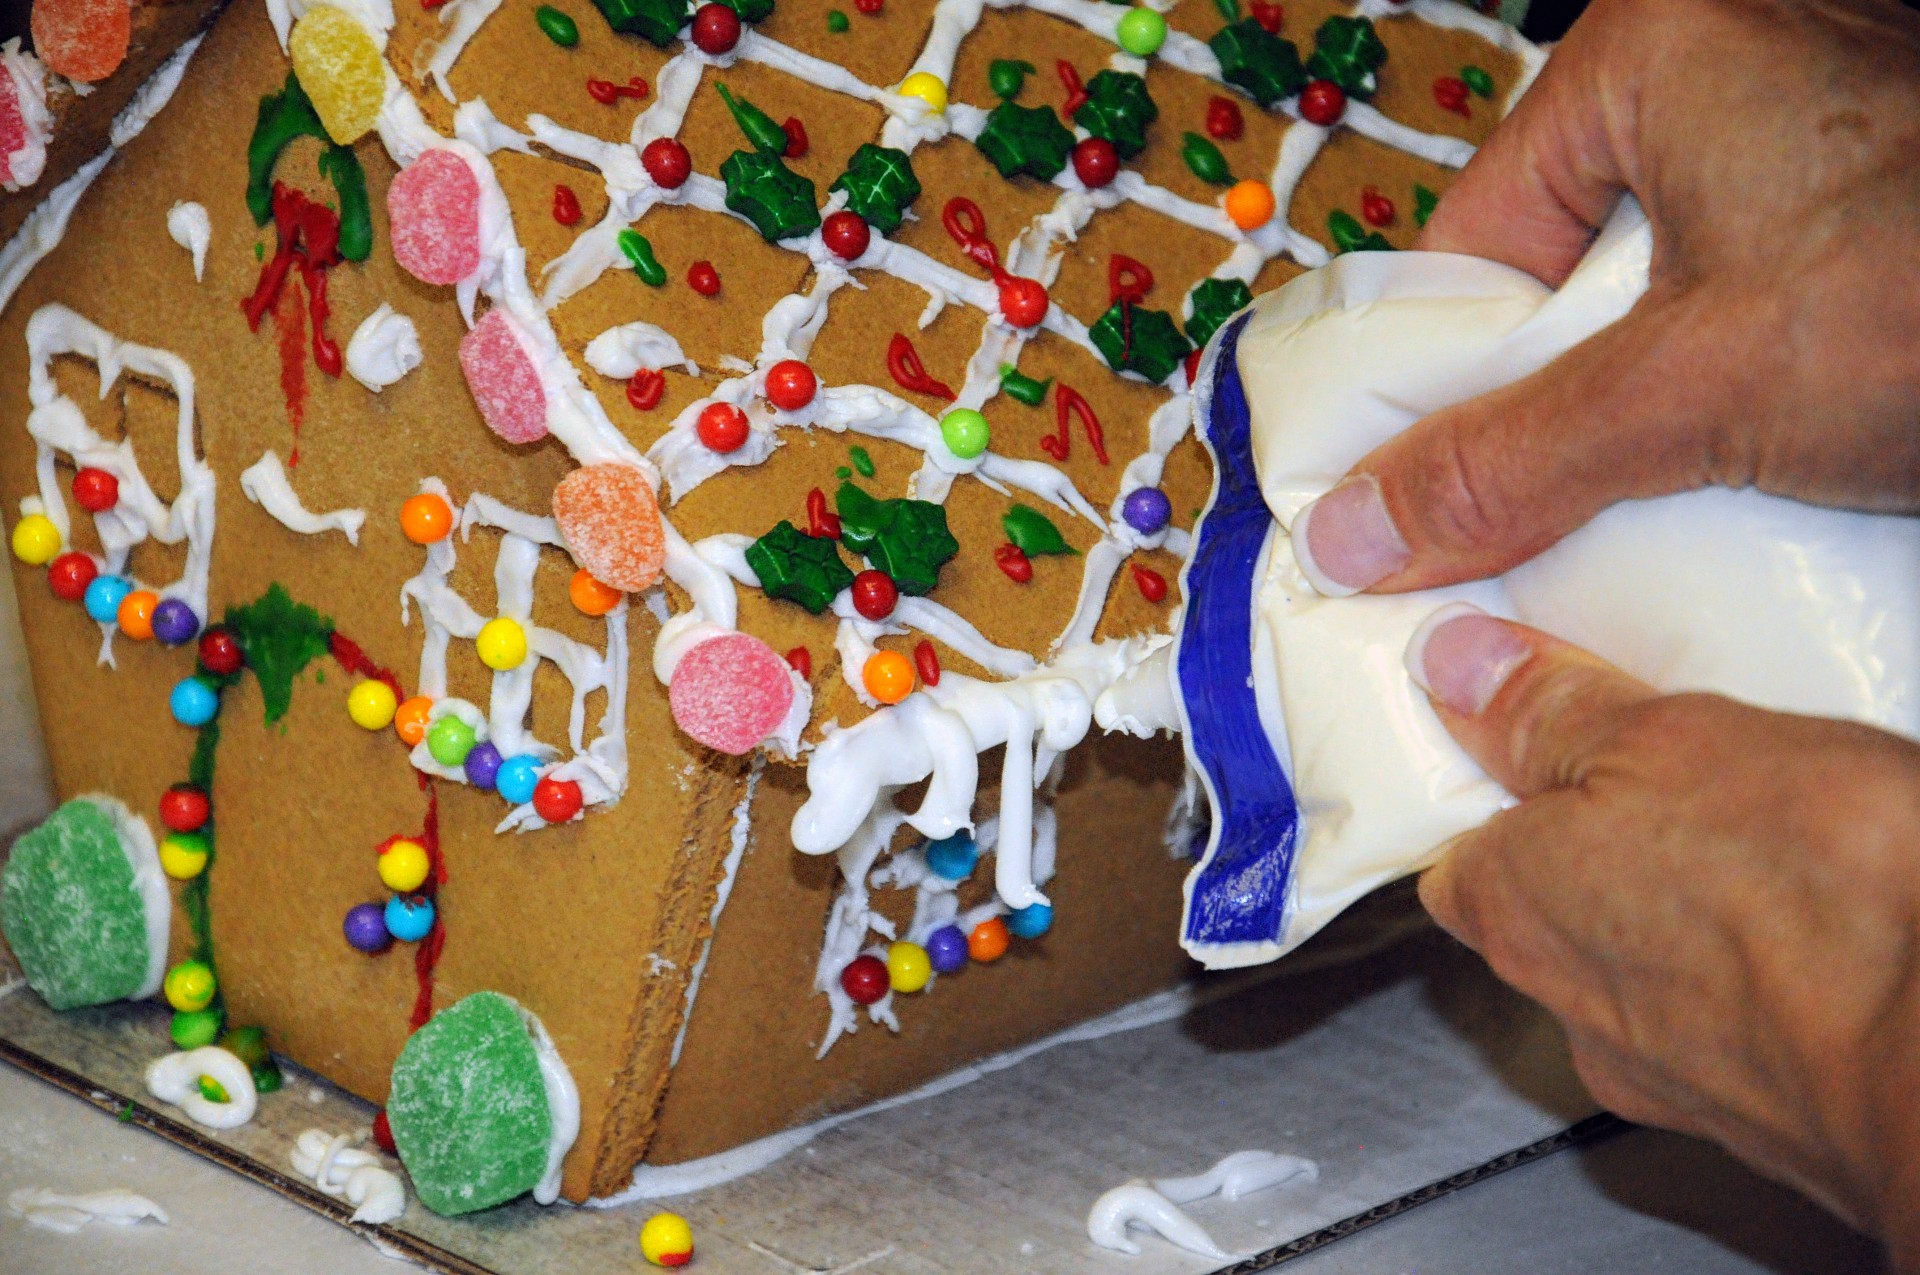 building-a-gingerbread-house-13-free-stock-photo-public-domain-pictures